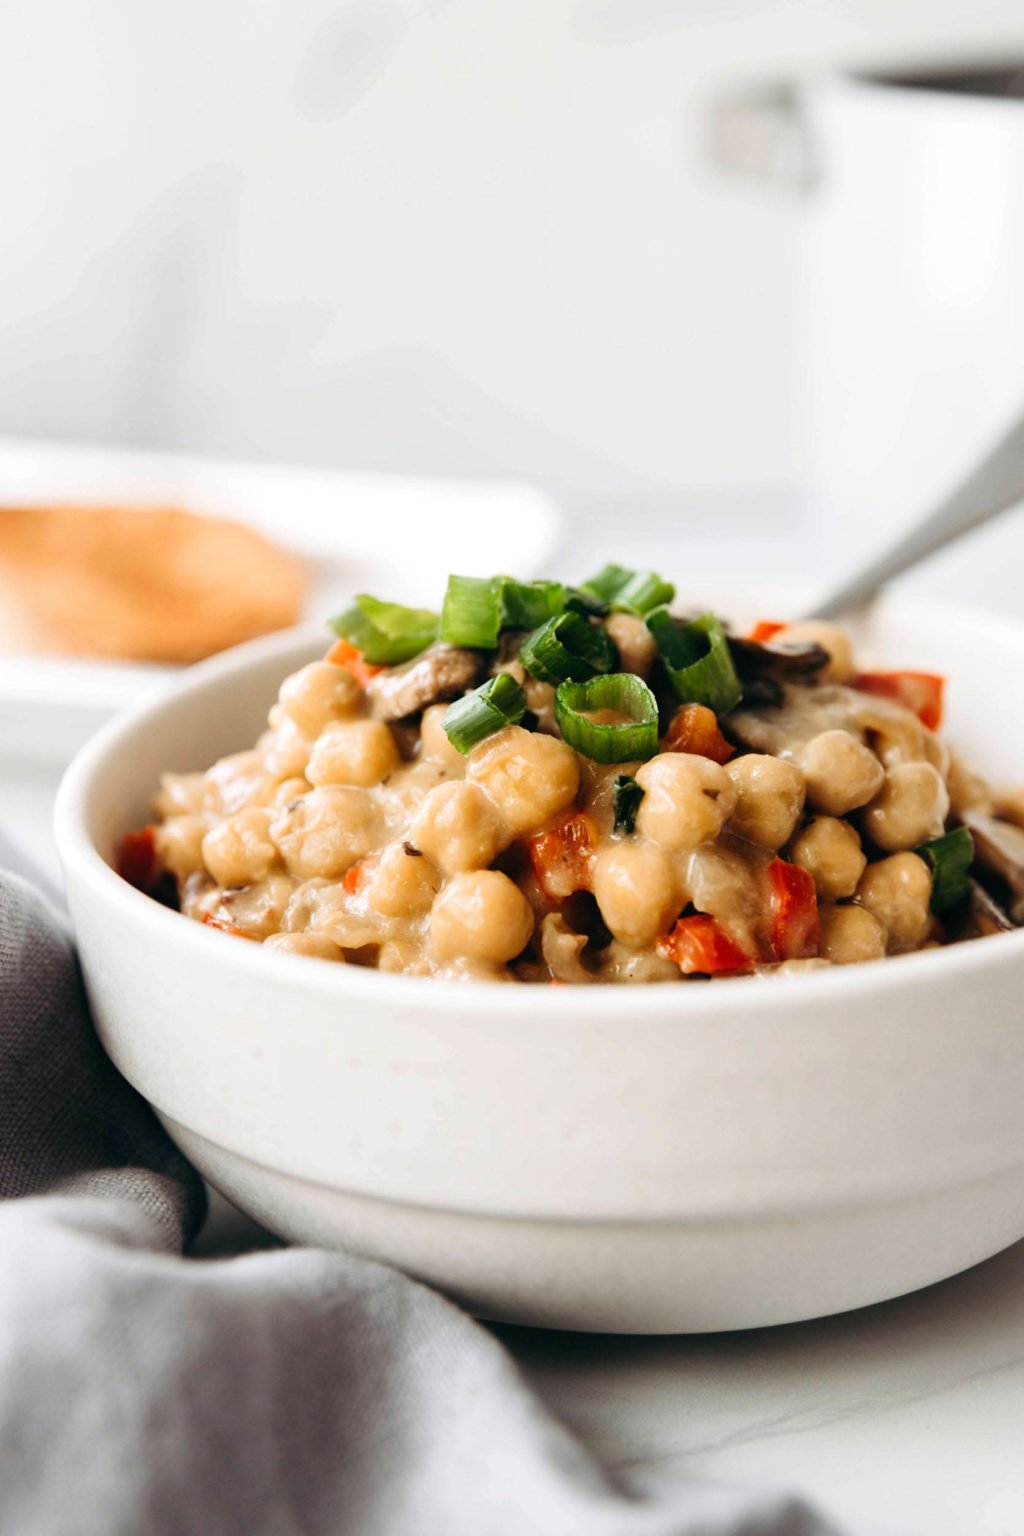 A white bowl holds a vegan dish of chickpeas à la King, topped with chopped, green scallion tops.